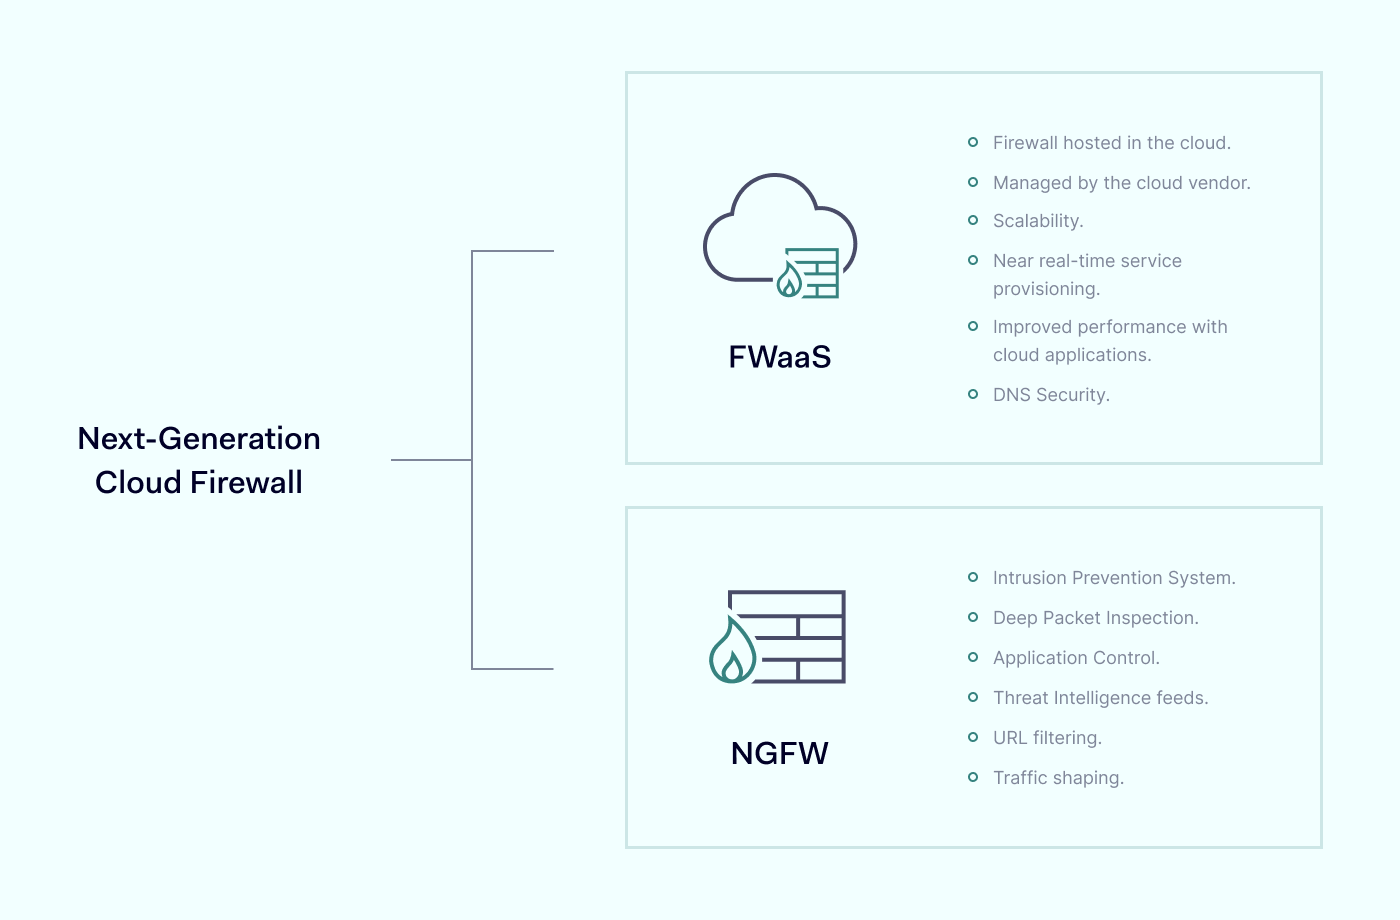 Differences between FWaaS and NGFW chart